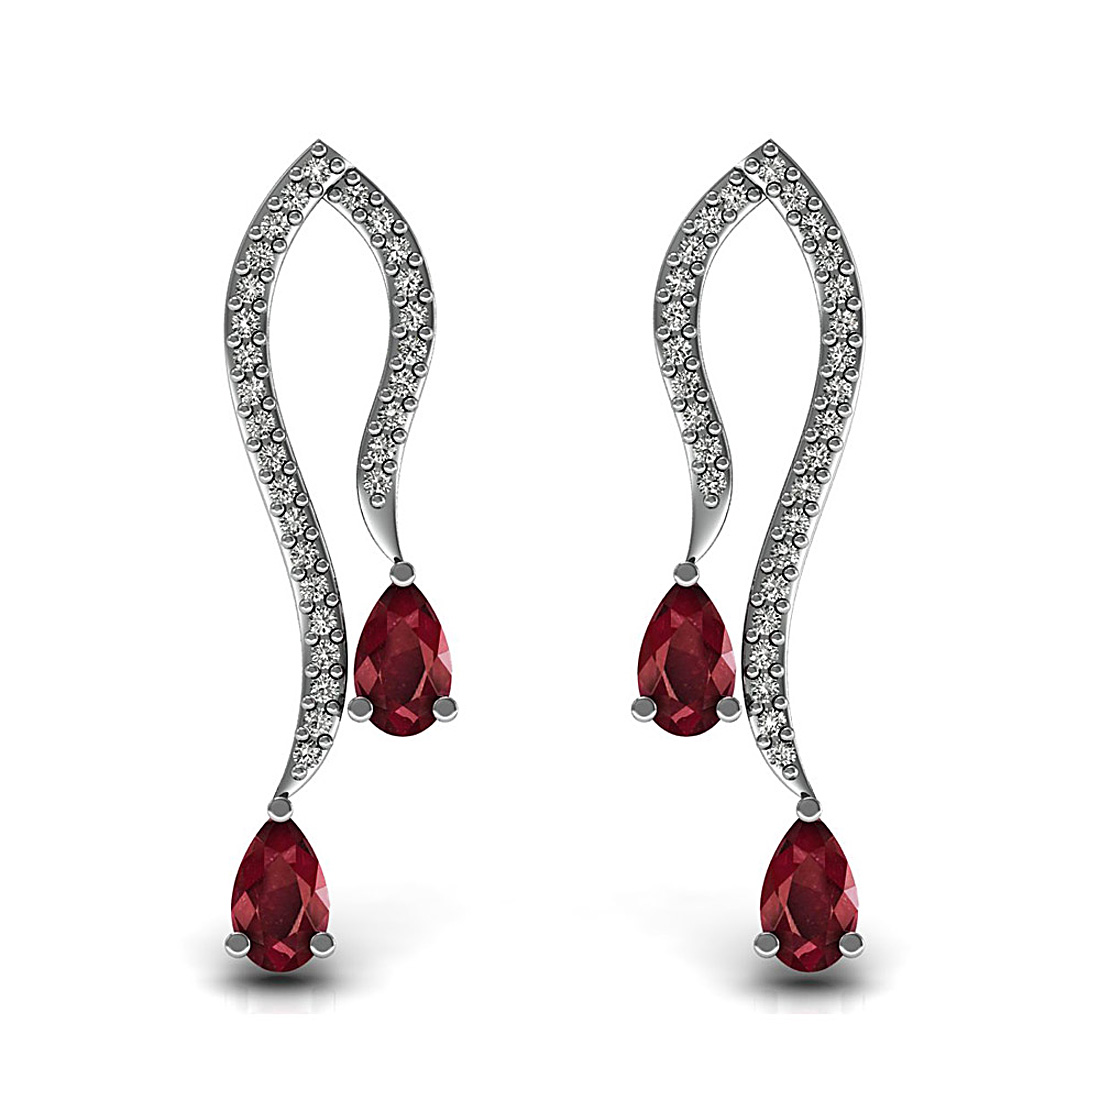 Natural ruby gemstone designer stud earrings made in 18k solid white gold adorned with real diamond.